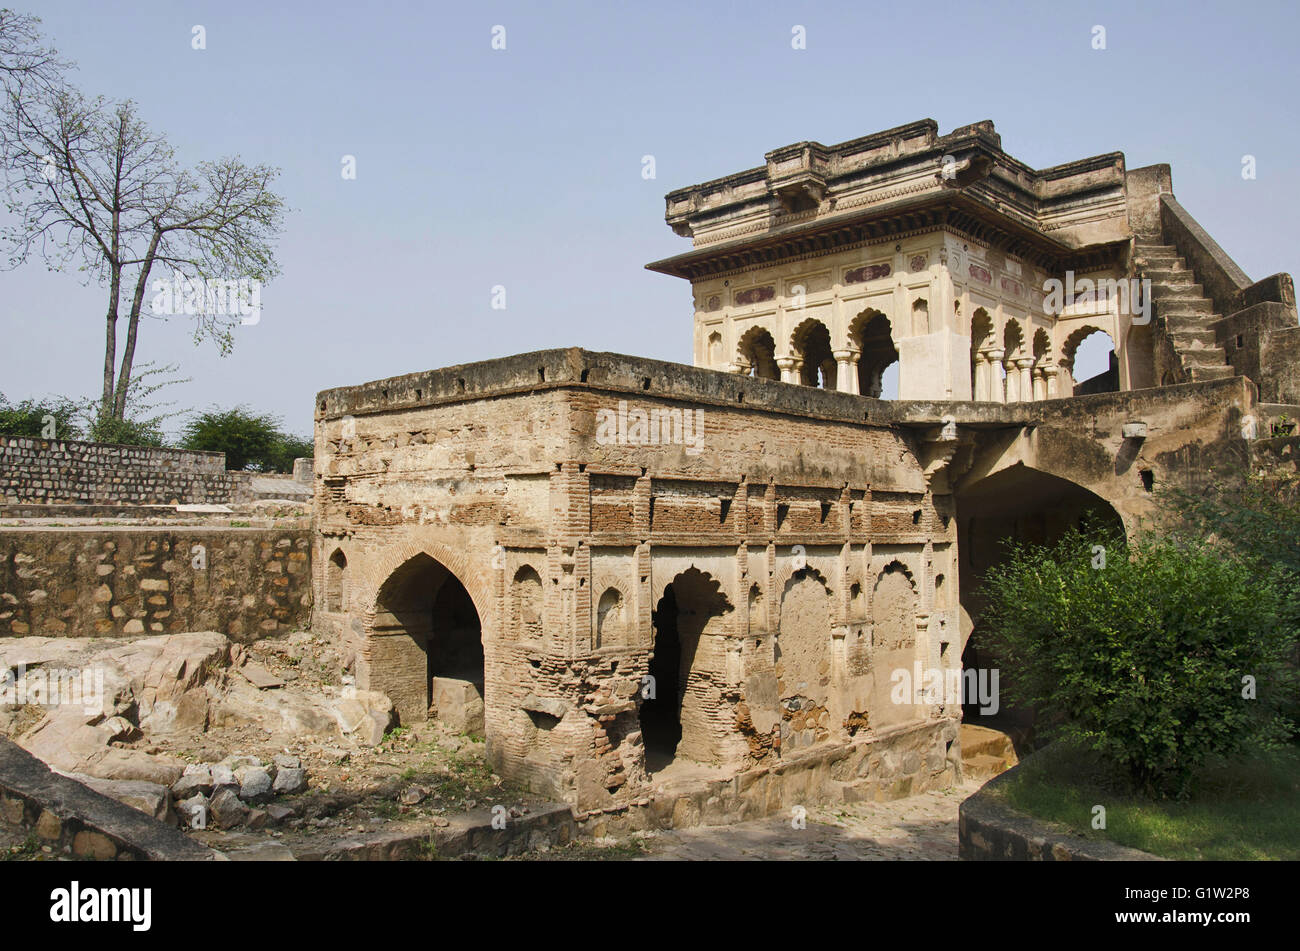 Photos) Jhansi Fort Photo Gallery | Bundelkhand Research Portal